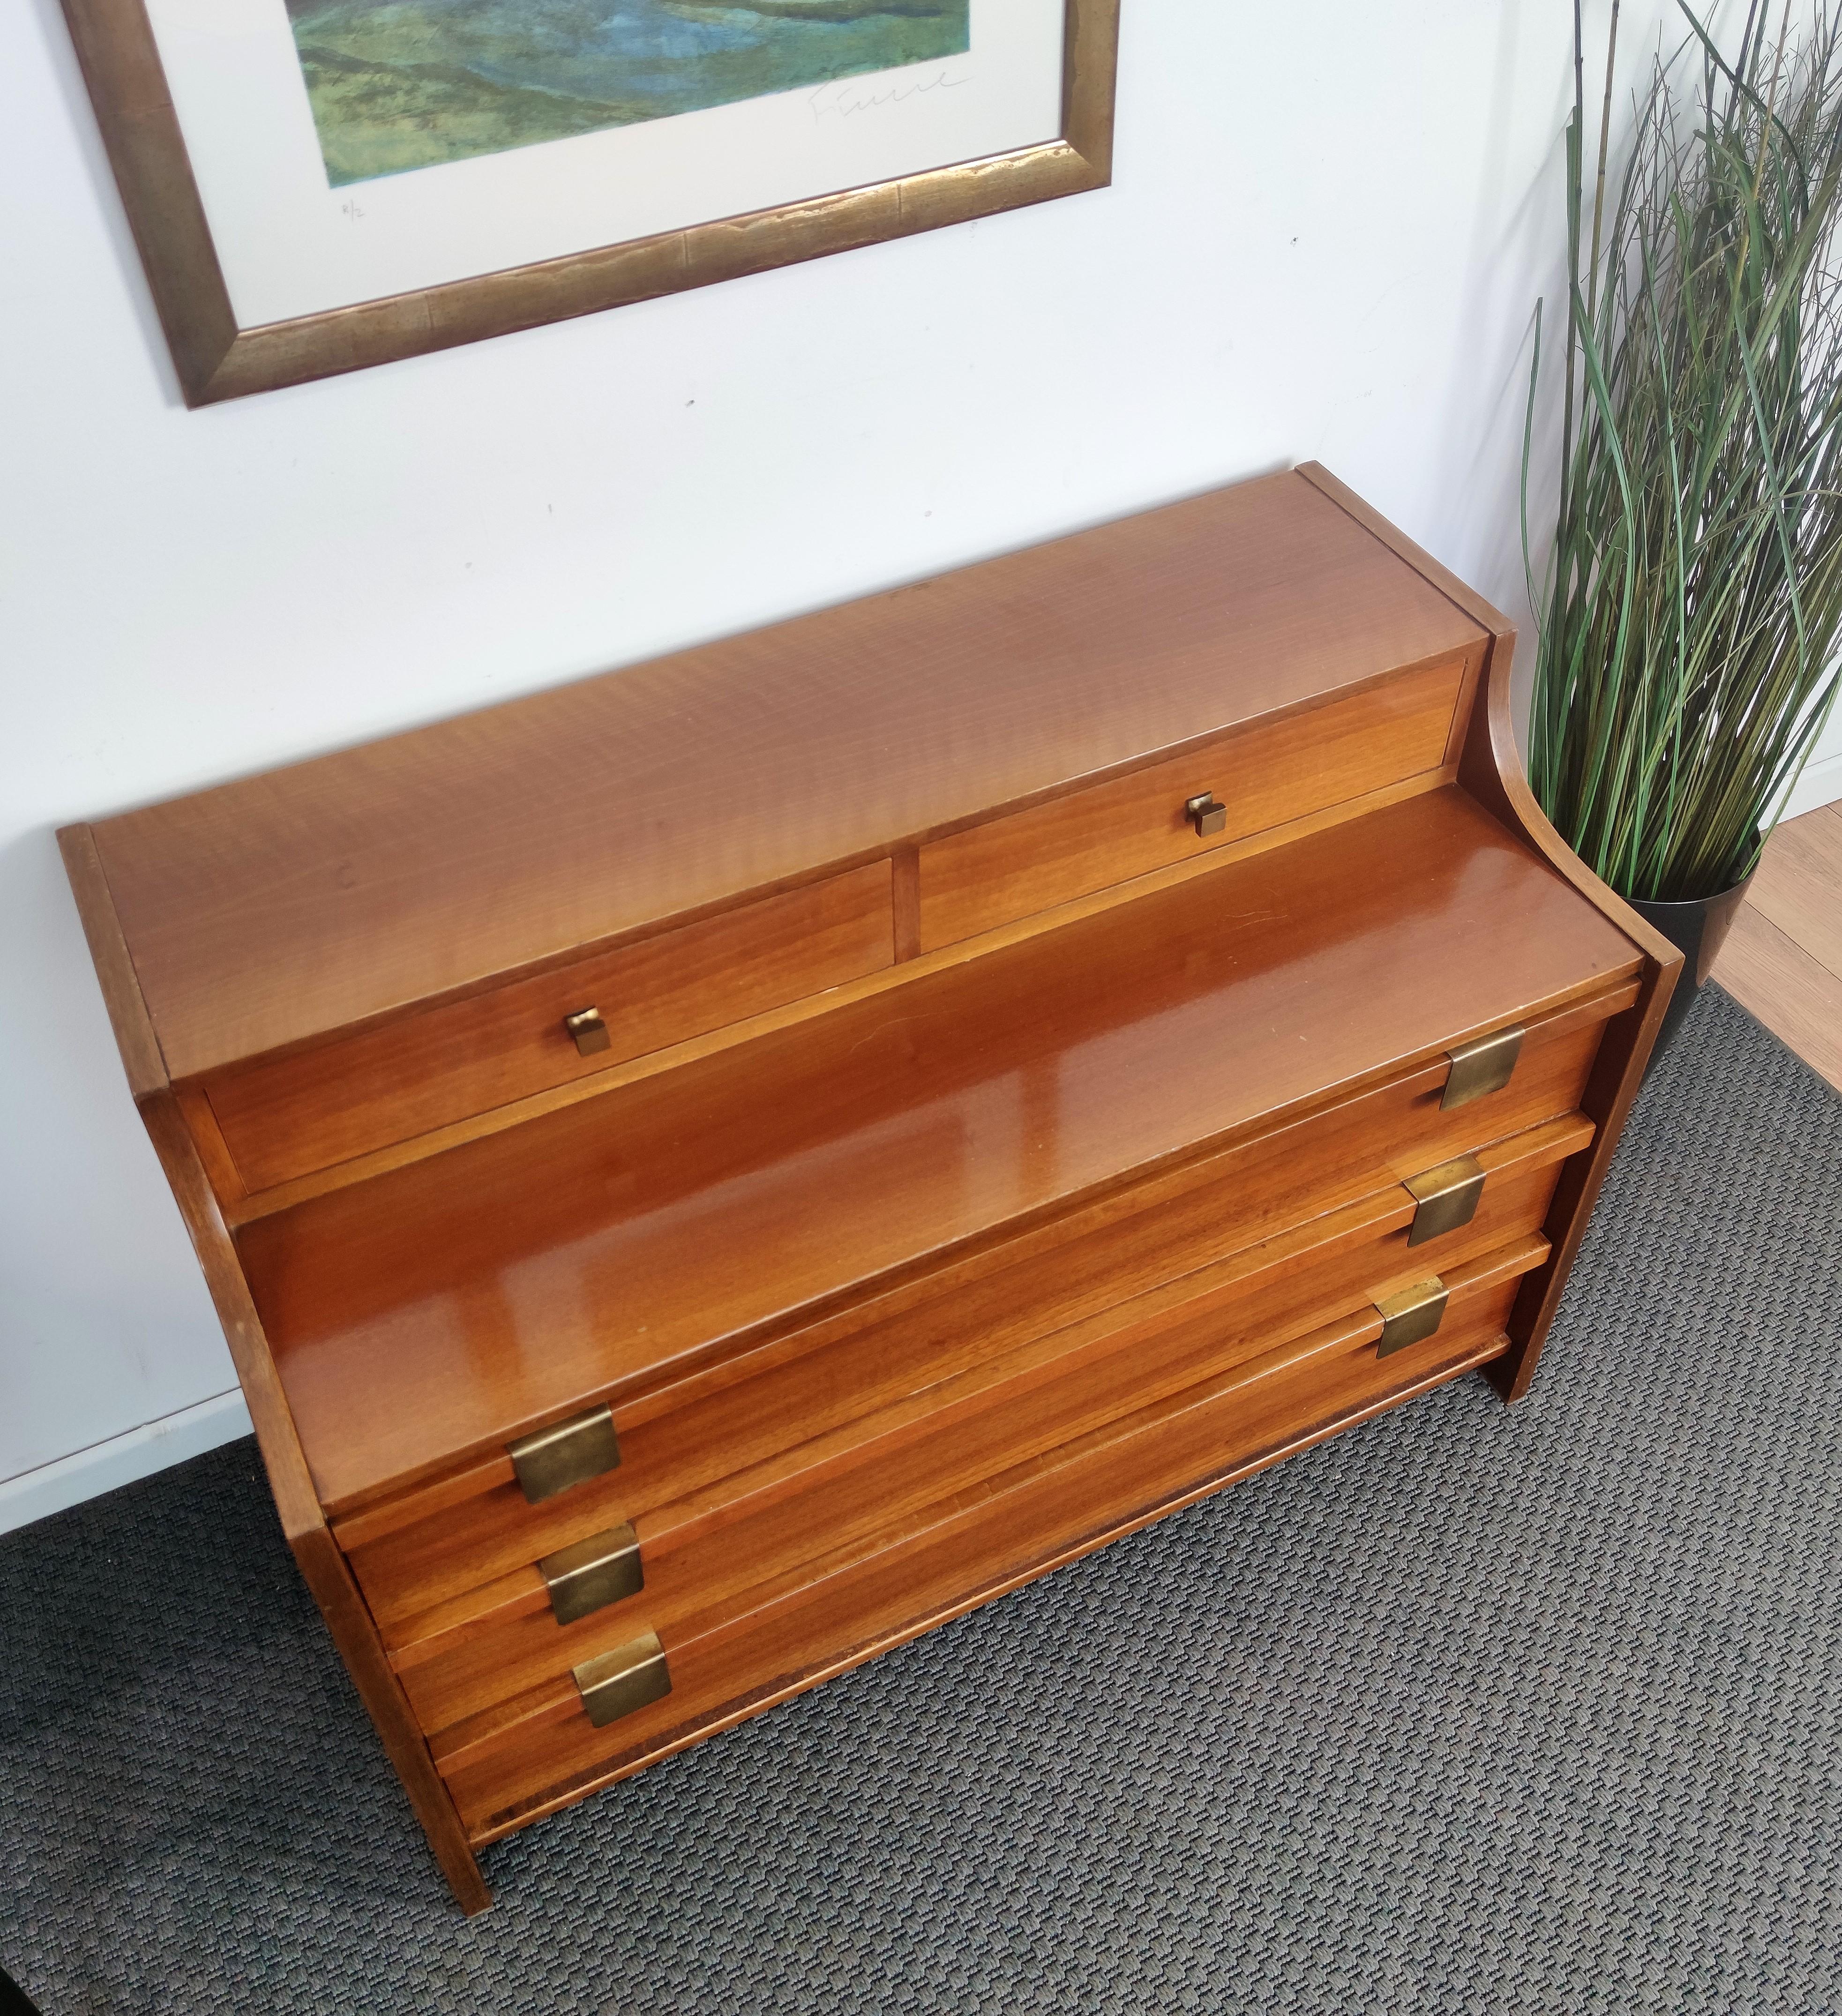 1960s Italian Mid-Century Modern Wood and Brass Commode Dresser Chest of Drawers For Sale 3